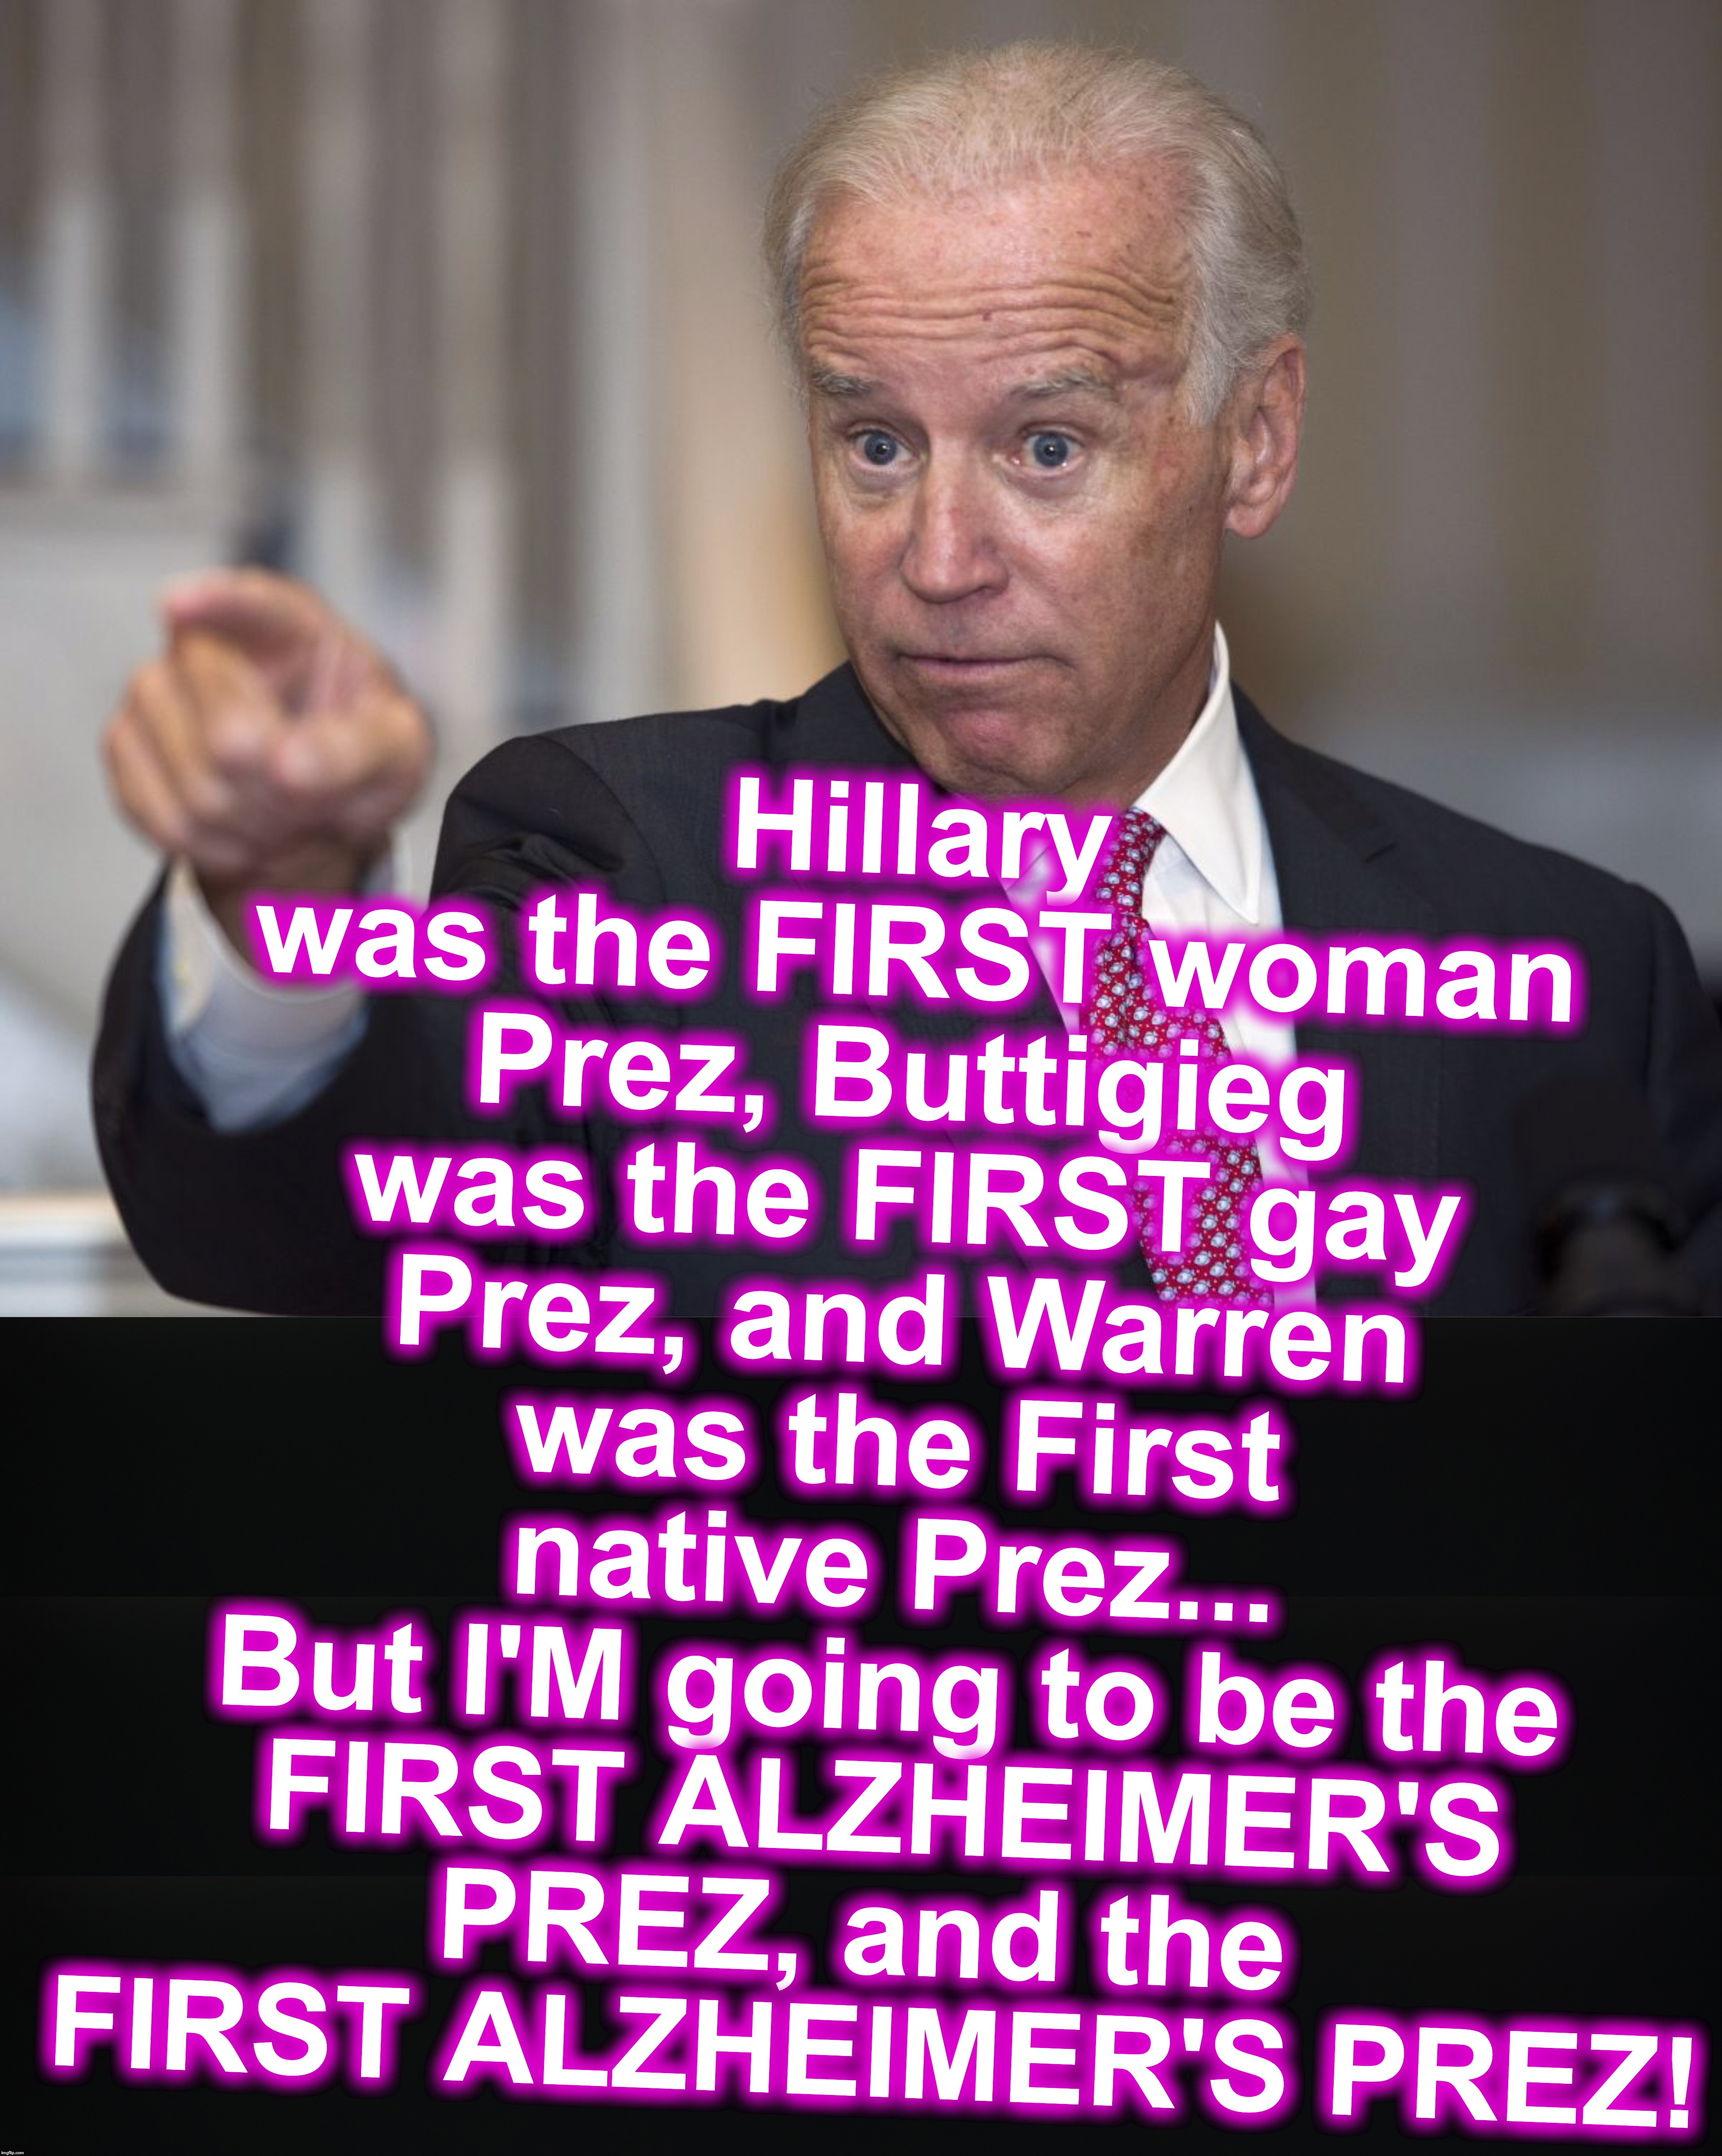 Hillary was the FIRST woman Prez, Buttigieg was the FIRST gay Prez, and Warren was the First native Prez...
 But I'M going to be the 
FIRST ALZHEIMER'S PREZ, and the 
FIRST ALZHEIMER'S PREZ! | image tagged in biden pointing | made w/ Imgflip meme maker